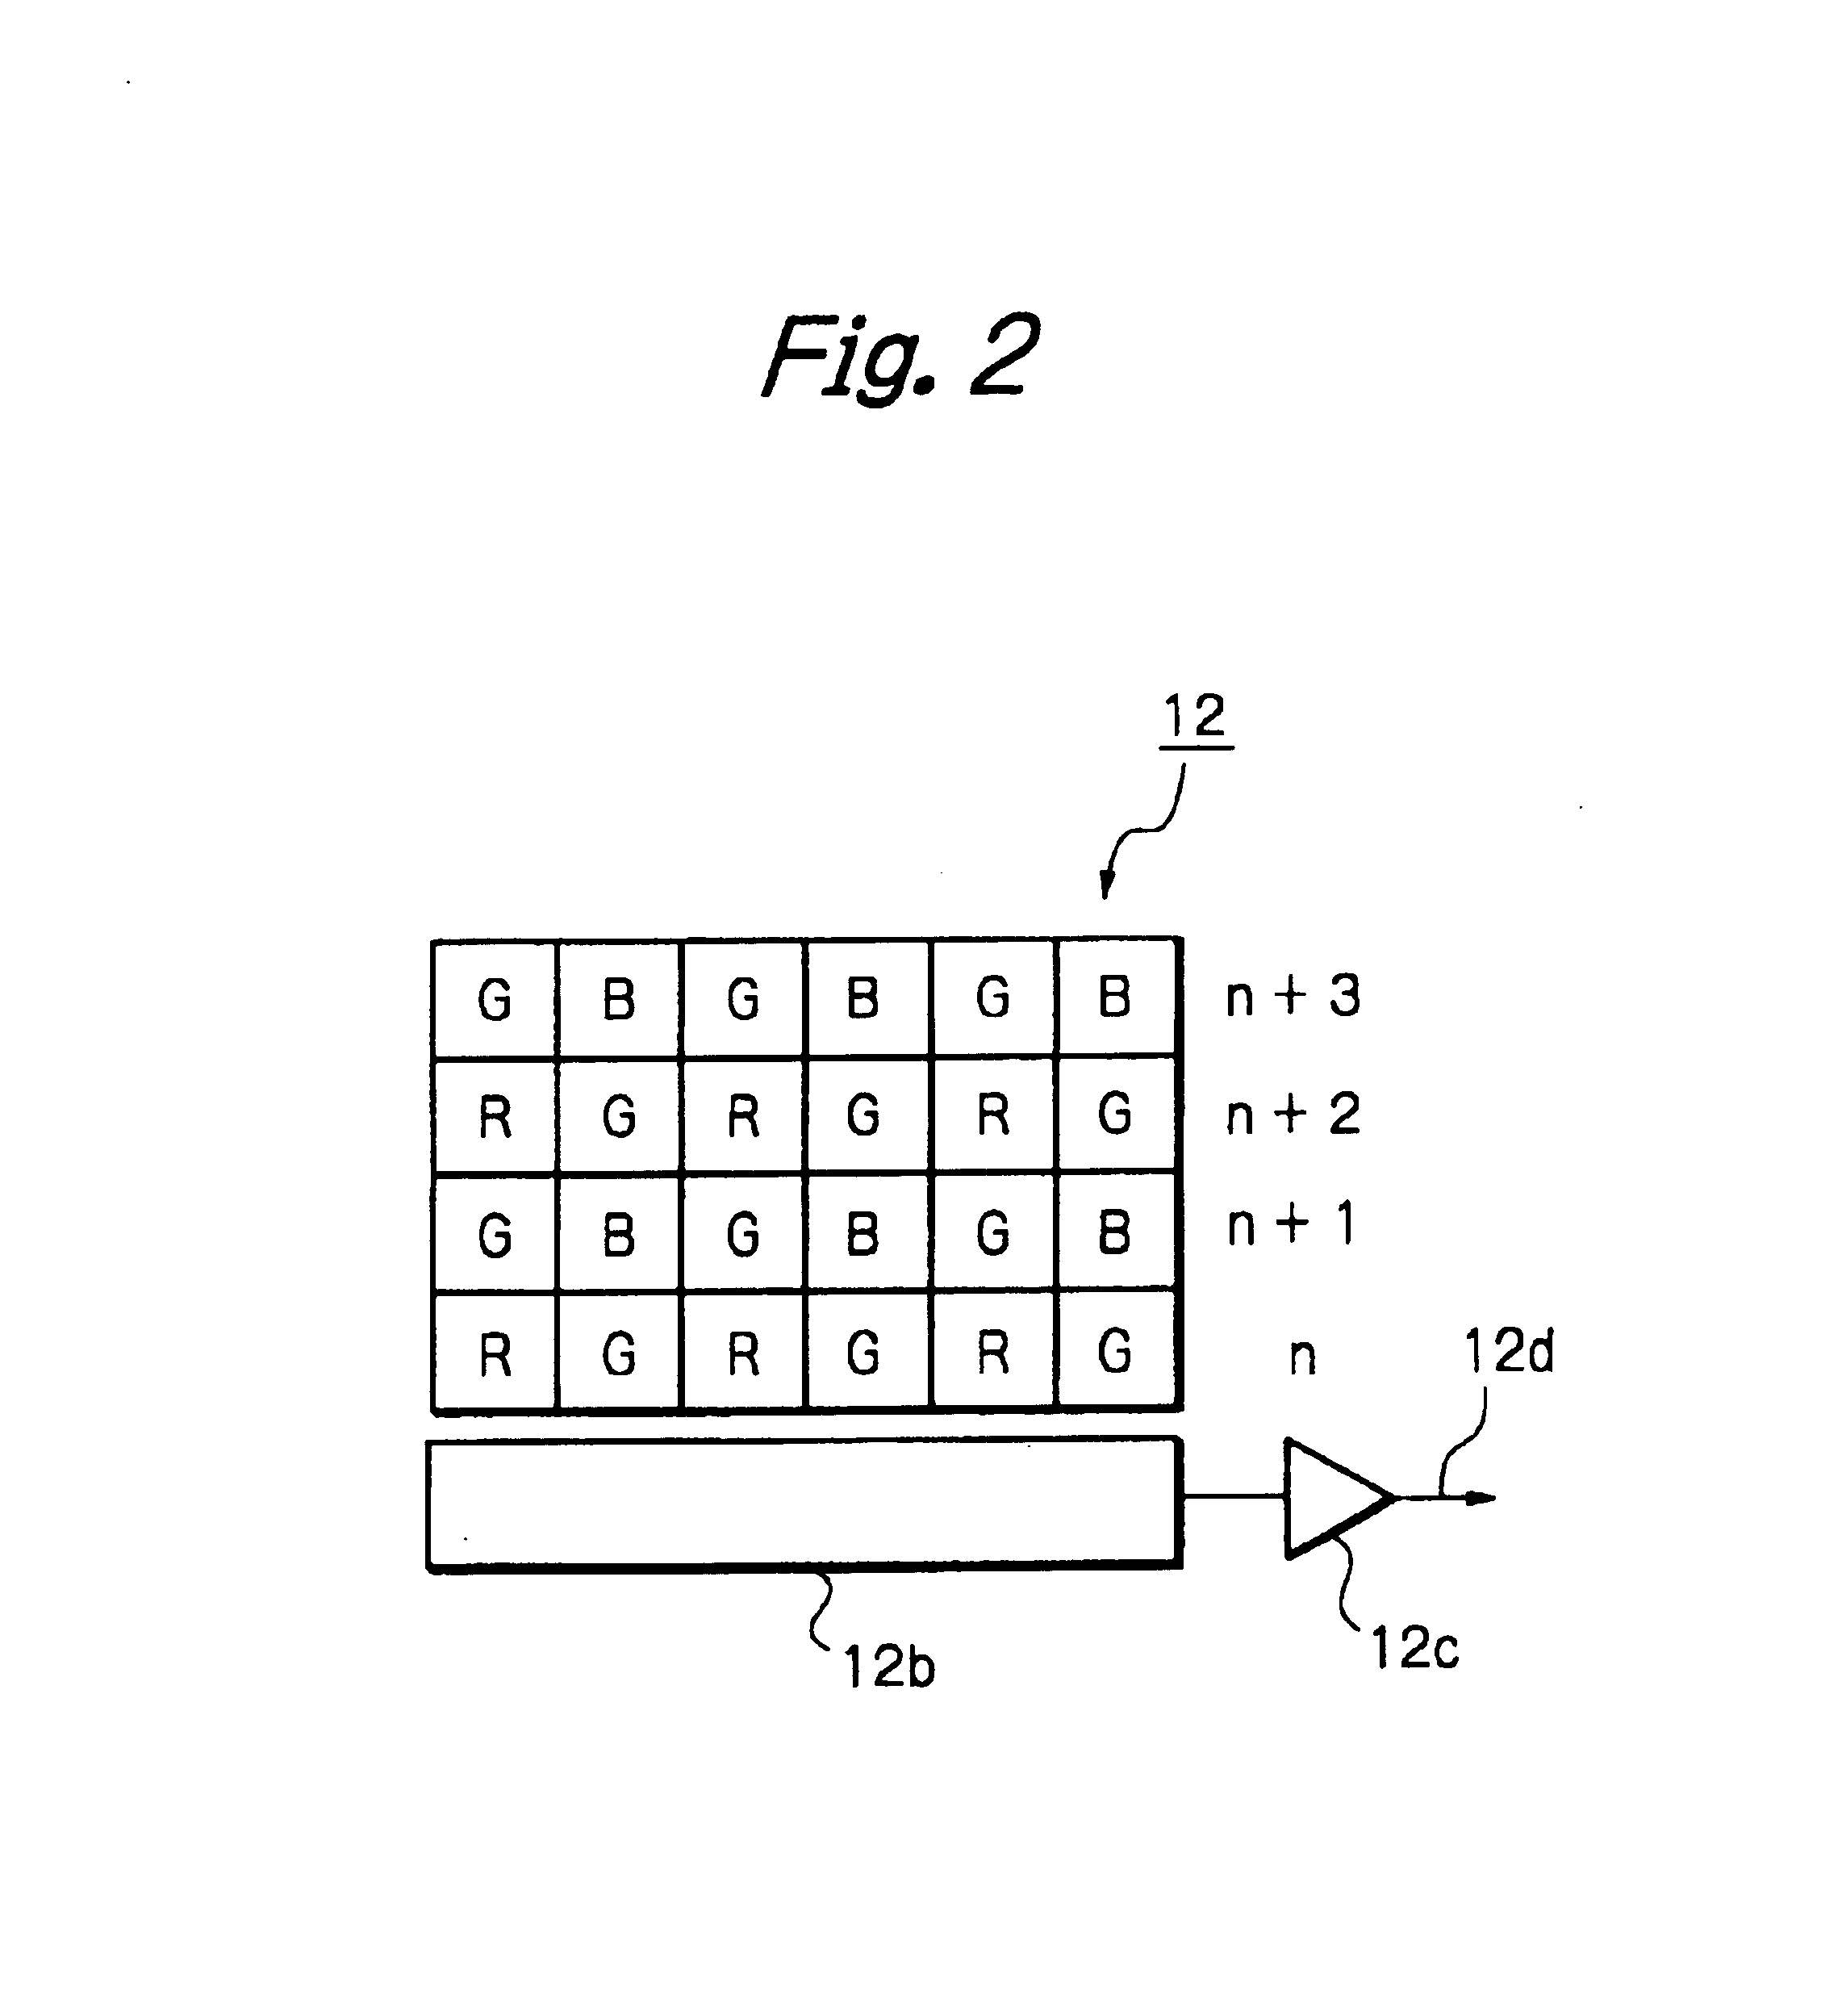 Solid-state image pickup apparatus adaptive to different display modes and having a high pixel density, synchronous video output capability and a method of signal processing